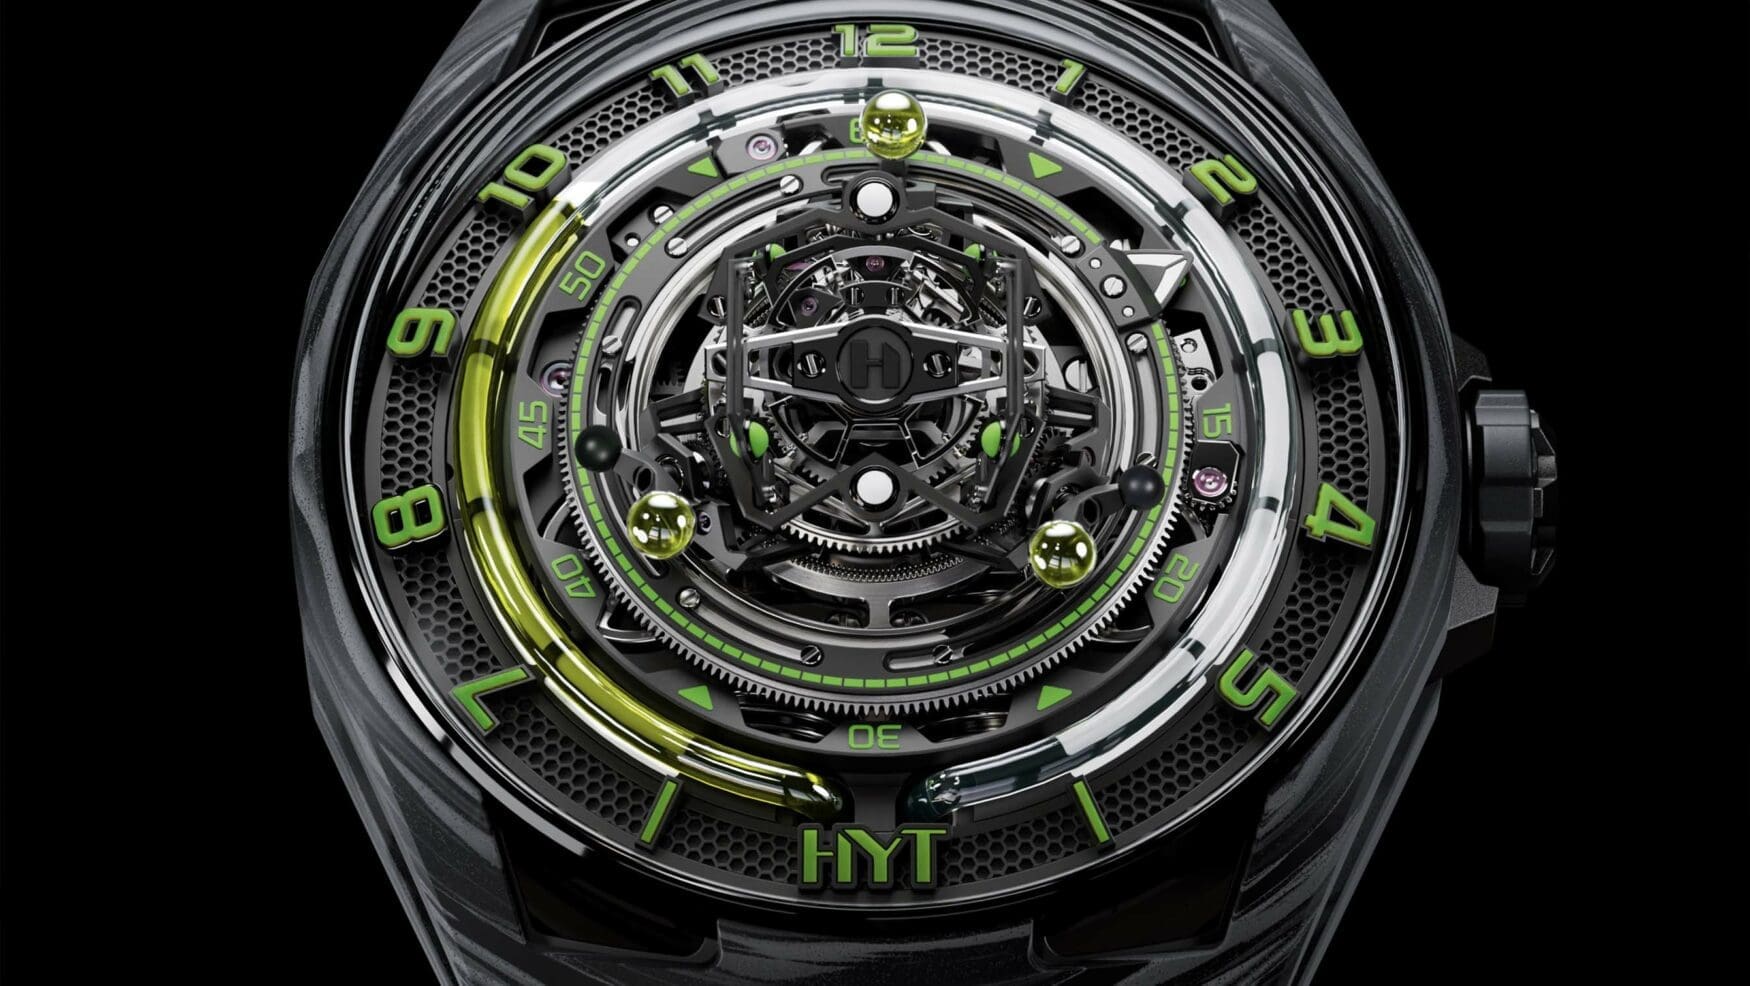 The HYT Conical Tourbillon is a visual blend of horology and science fiction